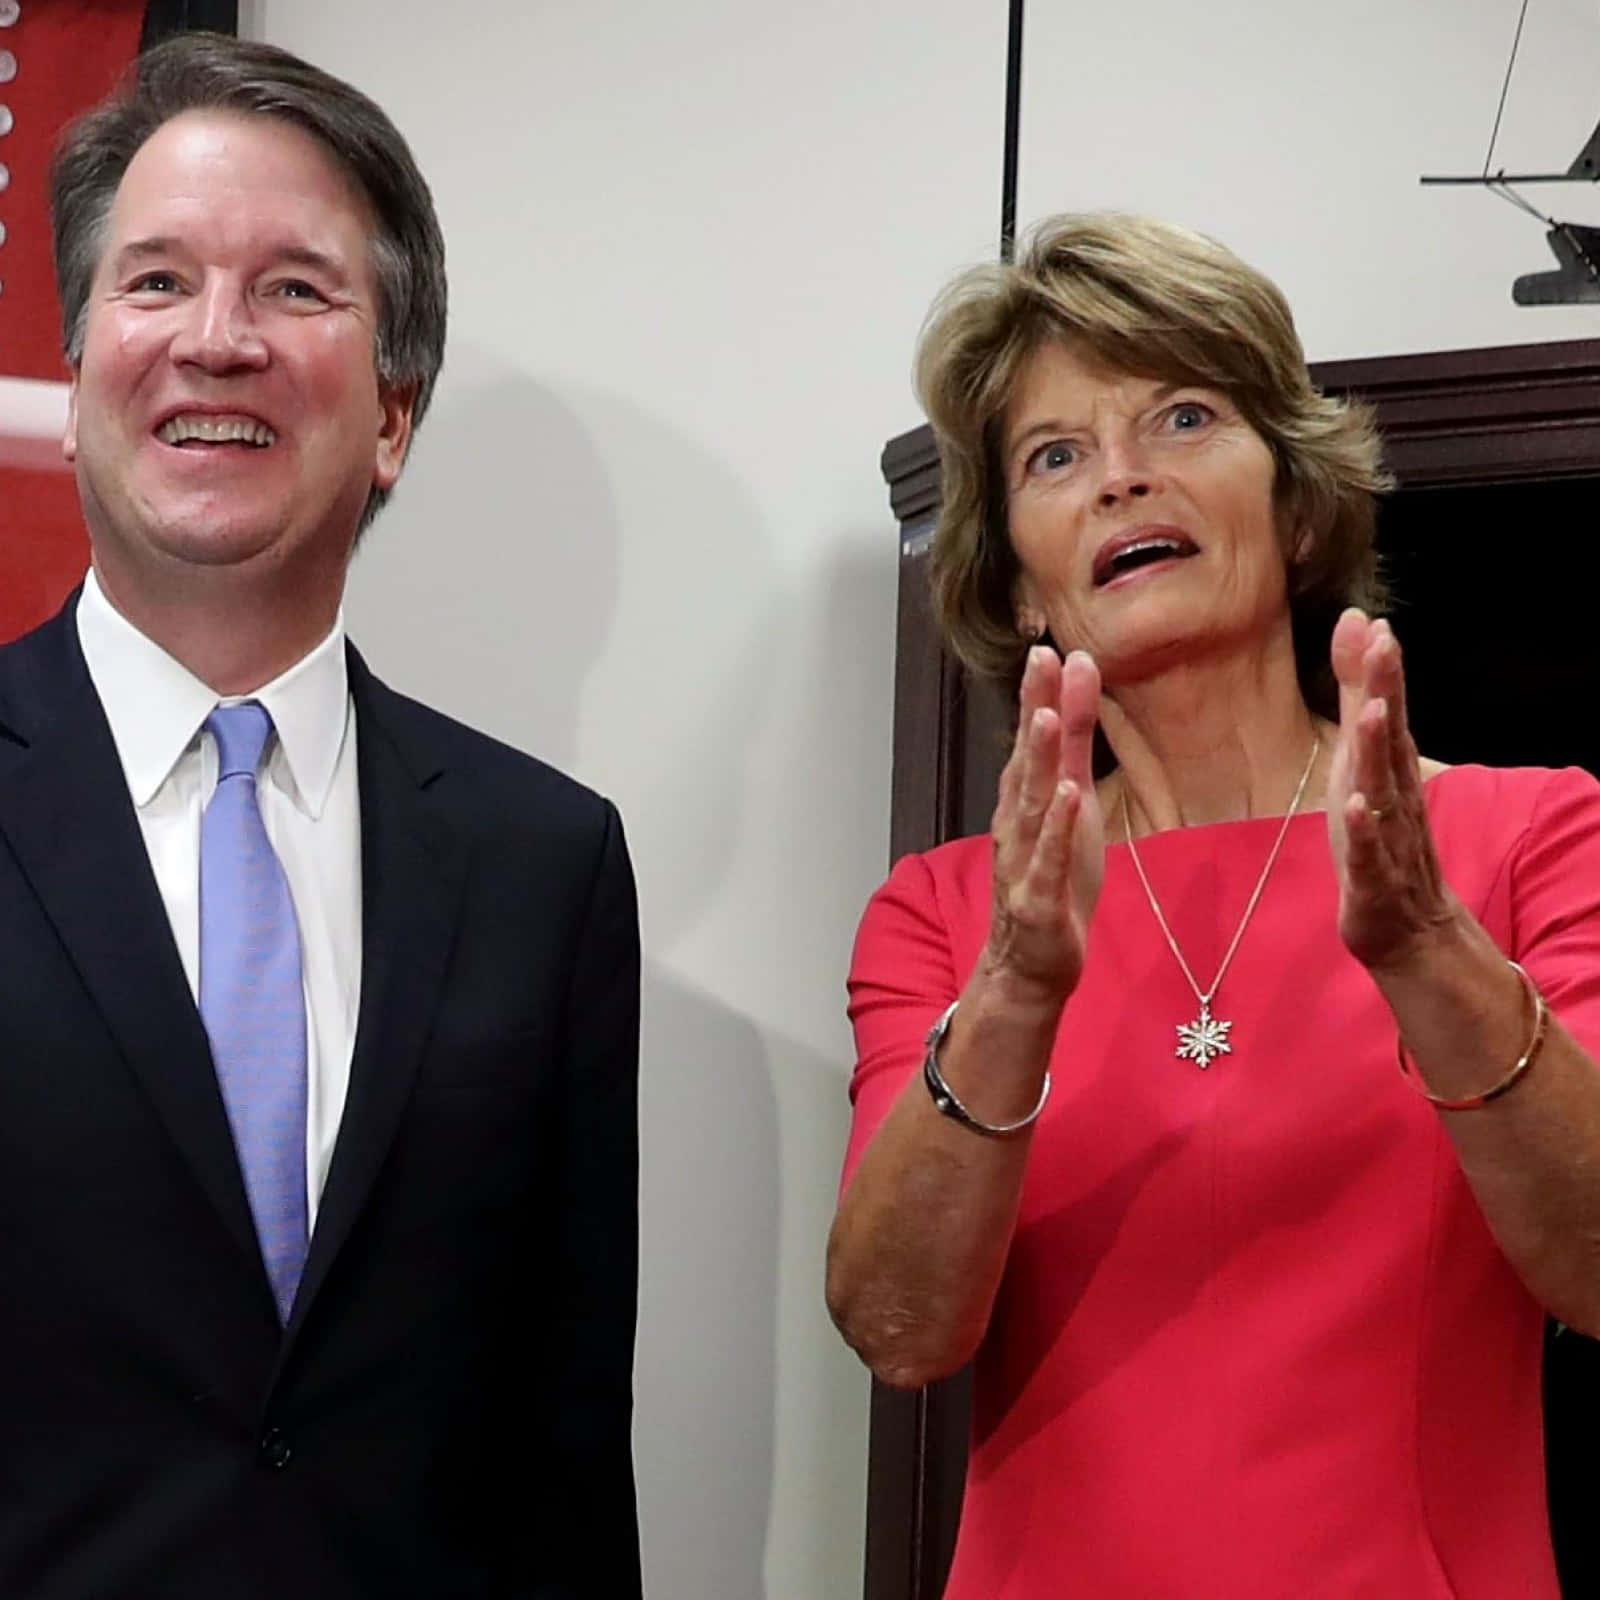 Lisamurkowski Brett Kavanaugh Is Not A Sentence Related To Computer Or Mobile Wallpaper. It Seems To Be A Combination Of Names Of Two Individuals. Can You Please Provide A Sentence Related To Computer Or Mobile Wallpaper That You Would Like Me To Translate Into Spanish? Fondo de pantalla